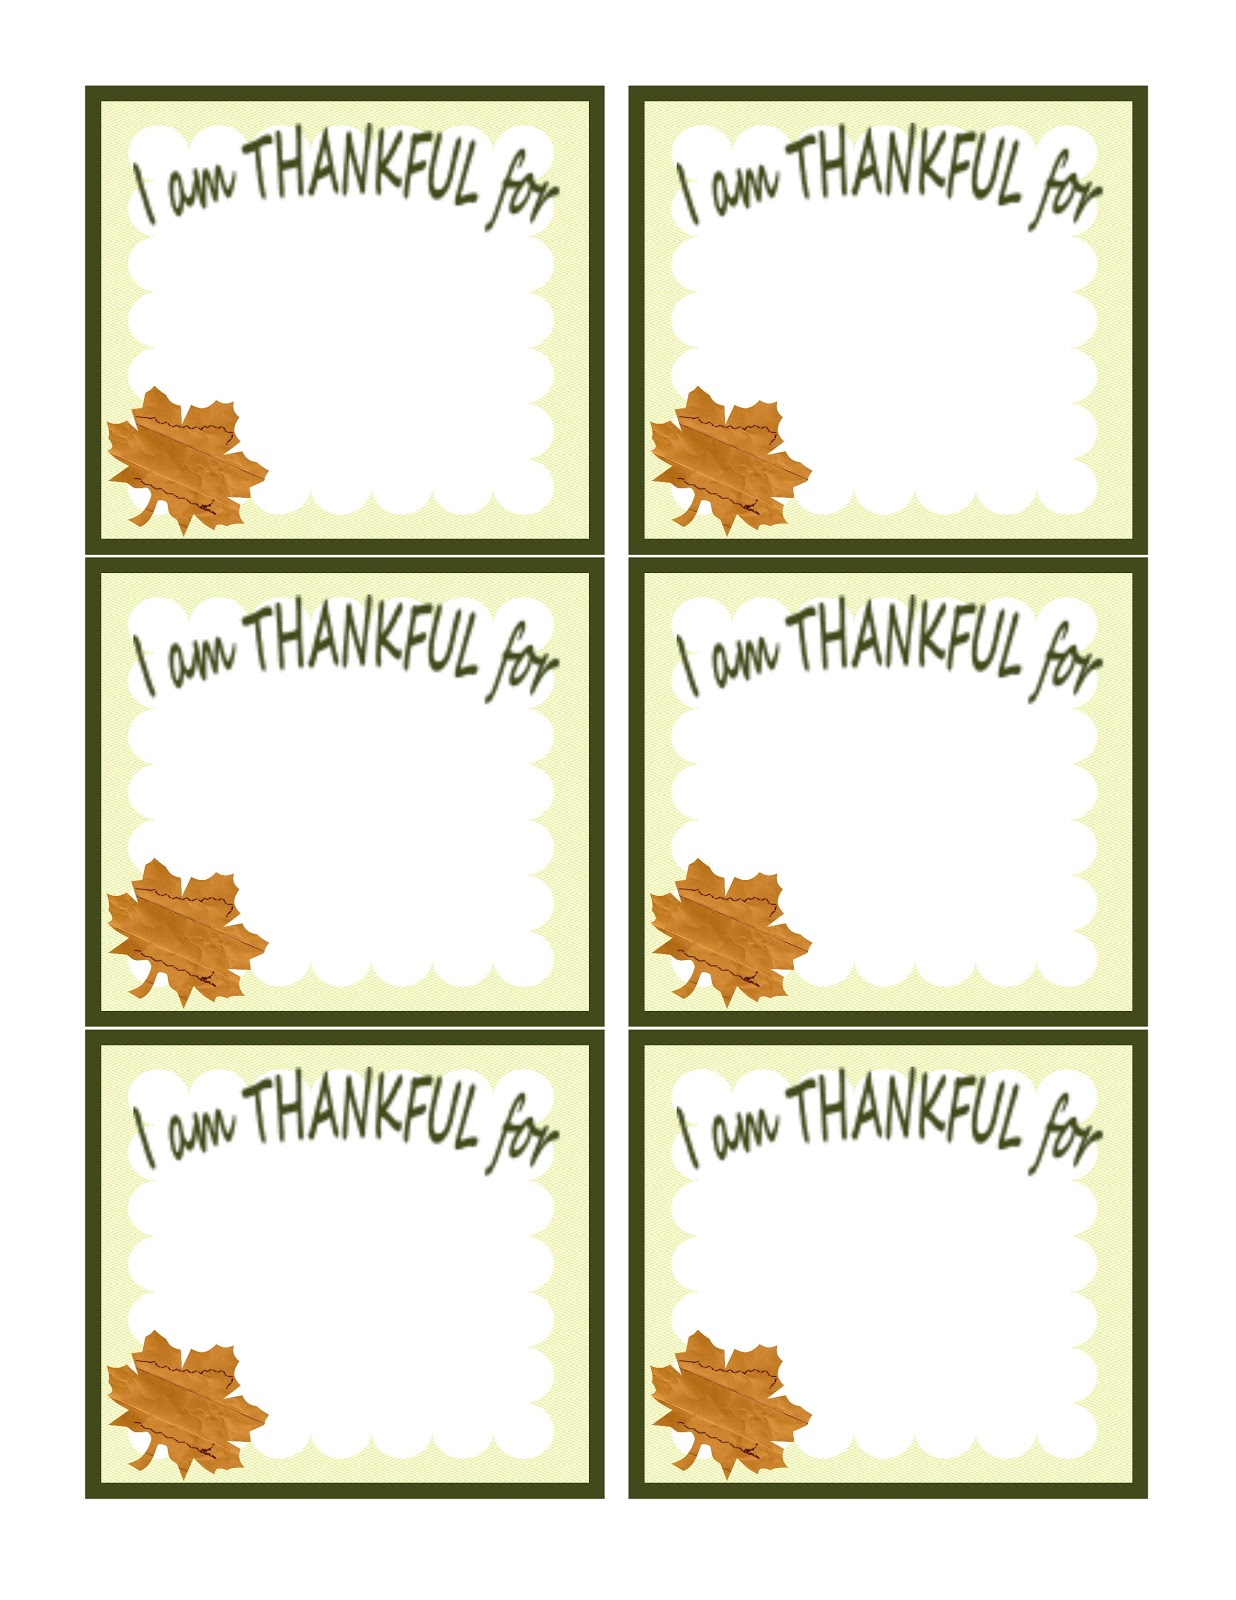 i-am-thankful-for-printable-printable-word-searches